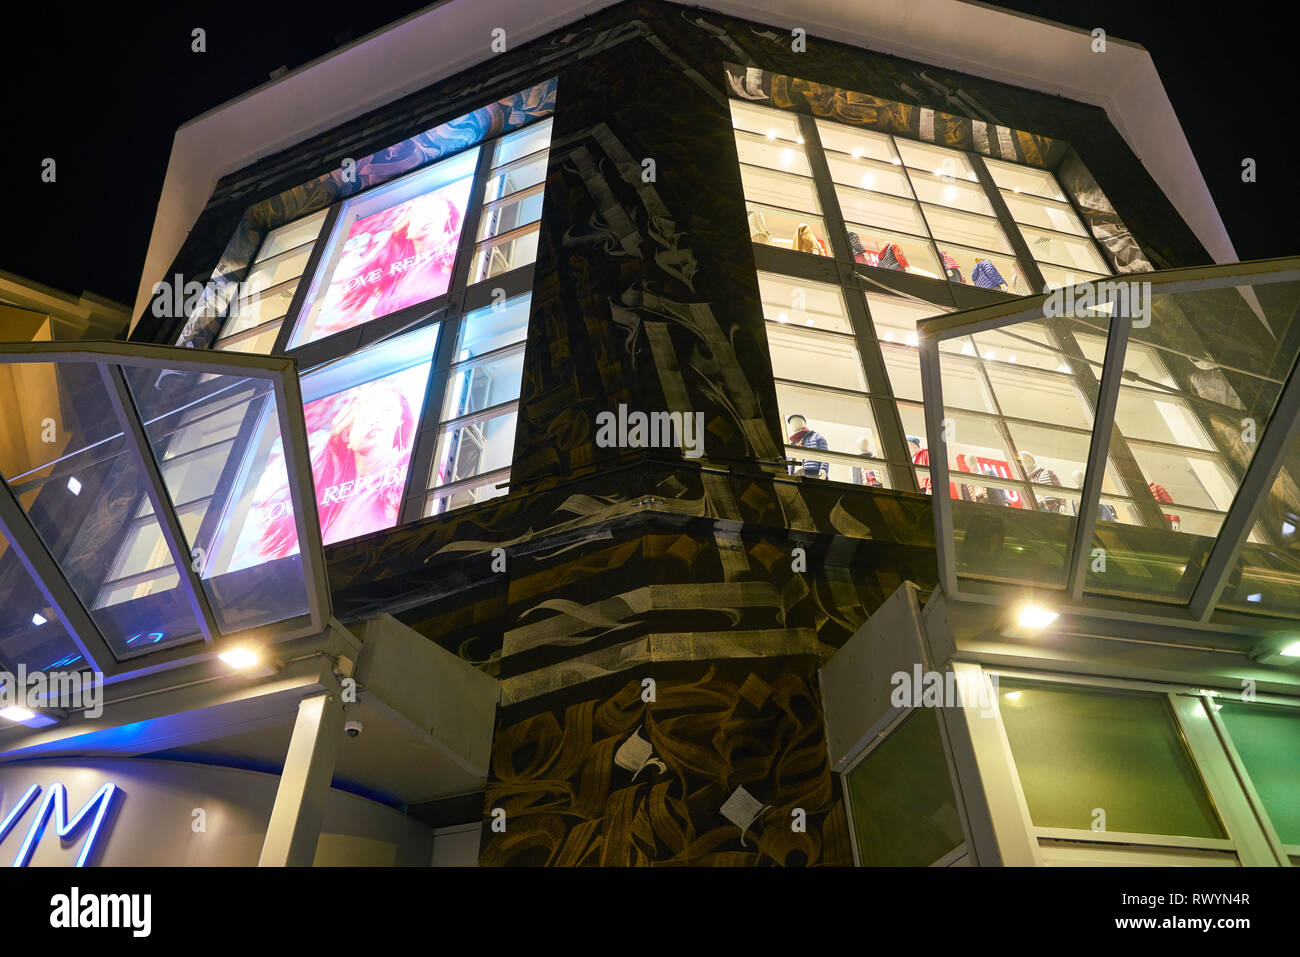 MOSCOW, RUSSIA - CIRCA SEPTEMBER, 2018: Atrium shopping center in Moscow, Russia. Stock Photo